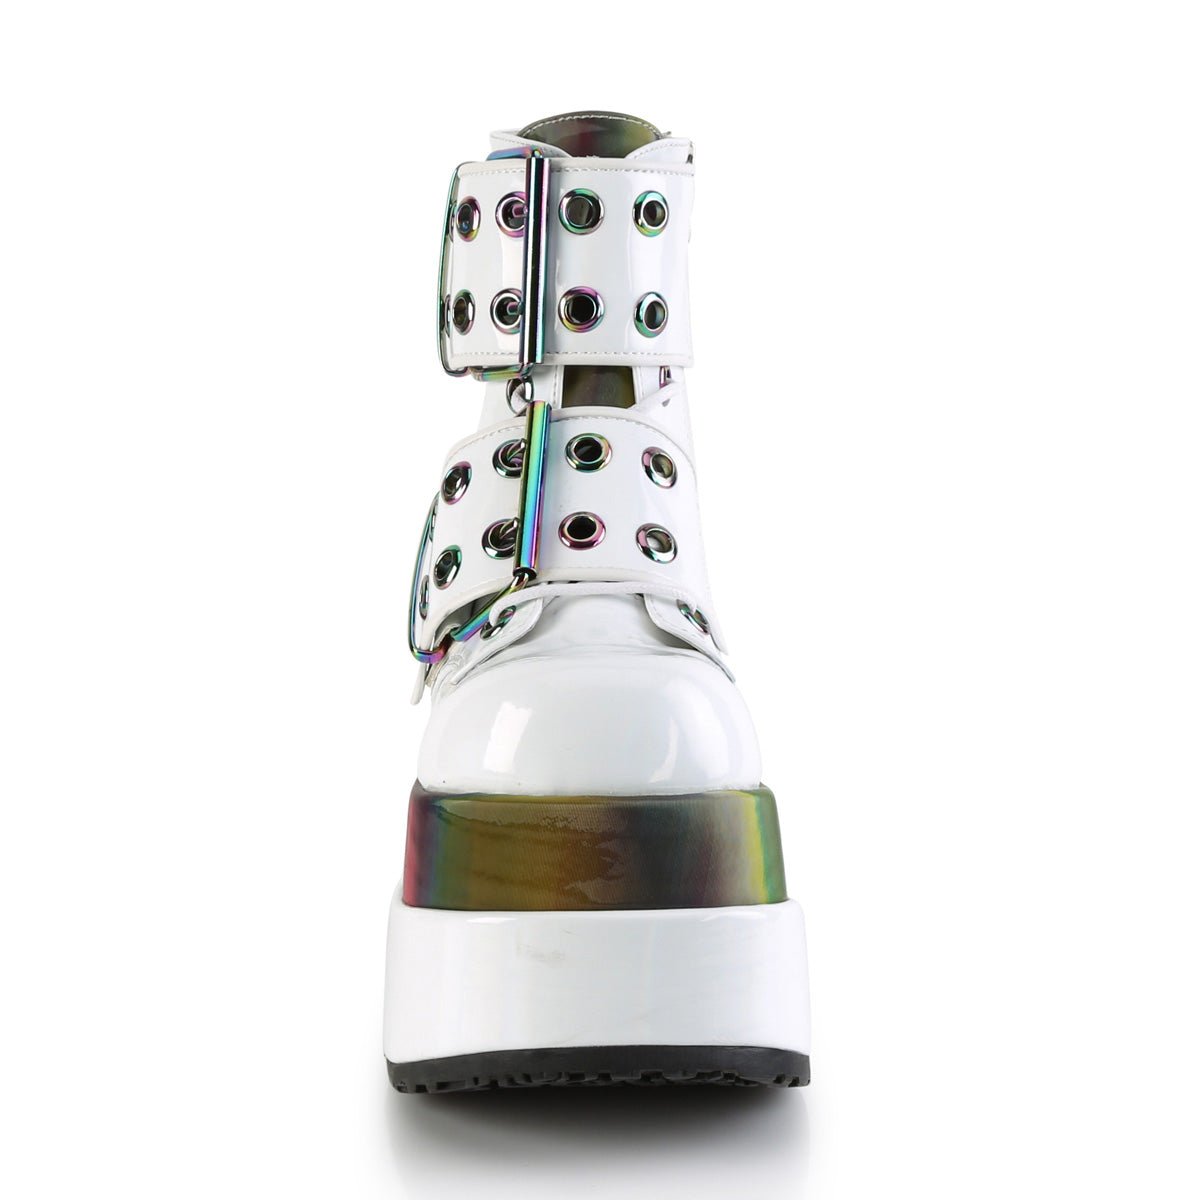 Too Fast | Demonia Bear 104 | White & Rainbow Patent Leather & Rainbow Reflective Women's Ankle Boots